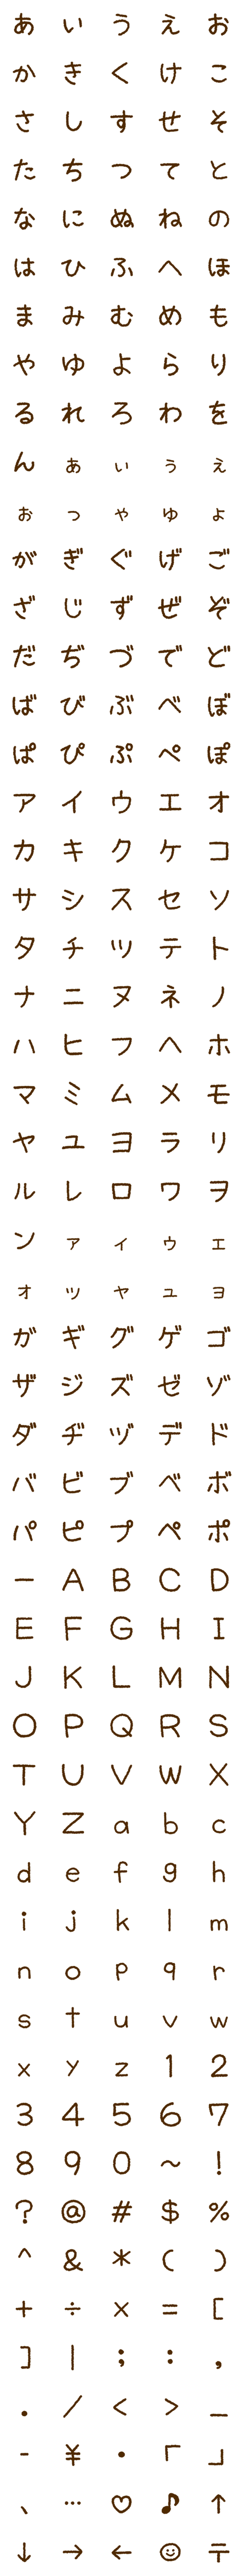 [LINE絵文字]モリタの字の画像一覧